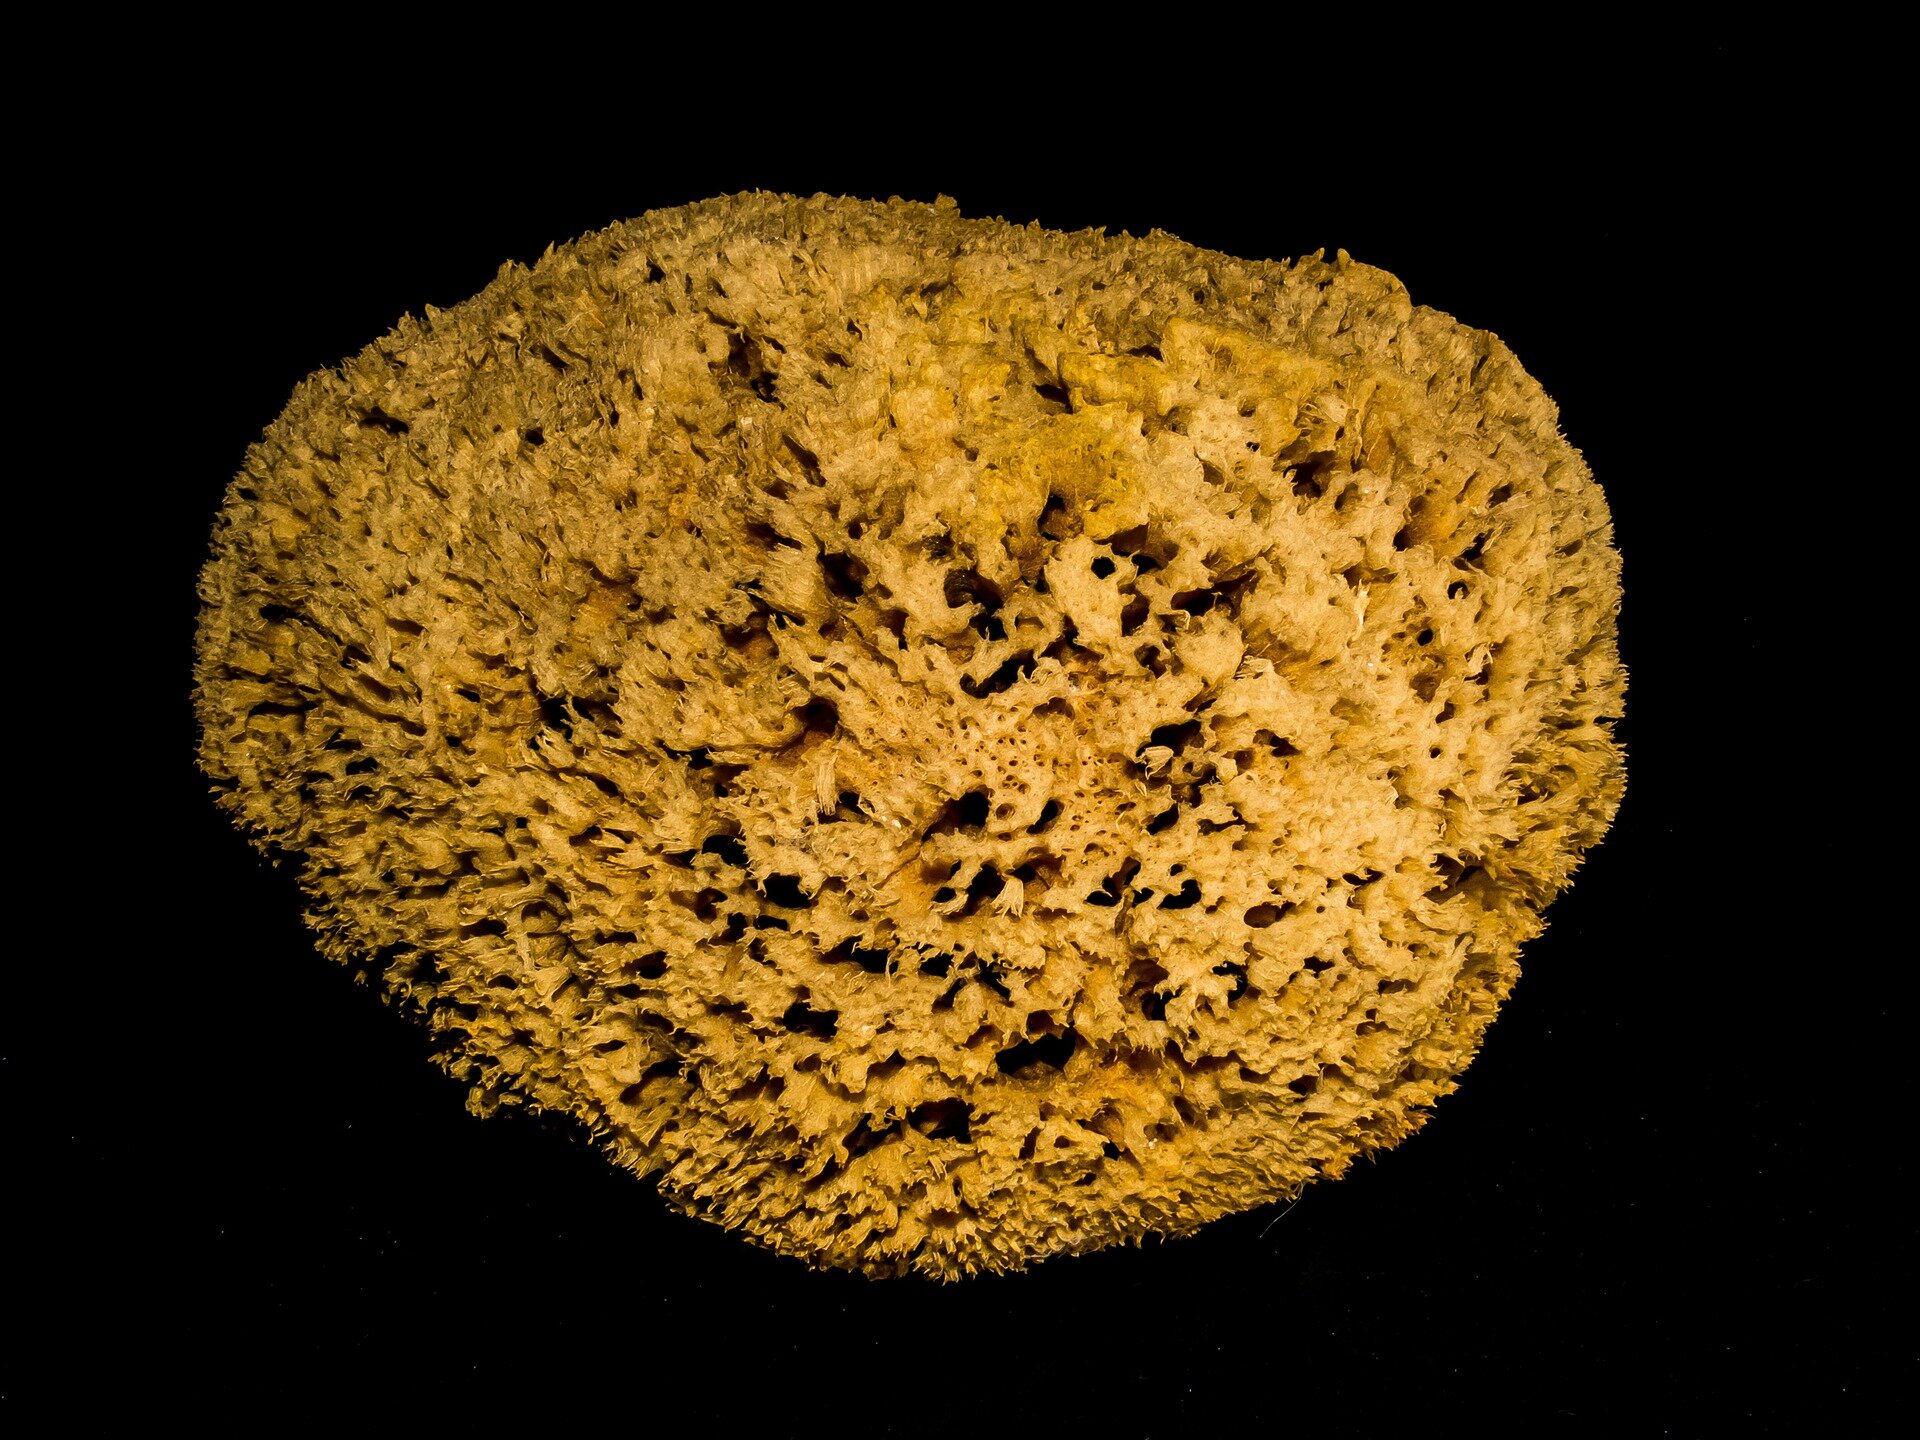 A Sea Sponge Could Save Your Life